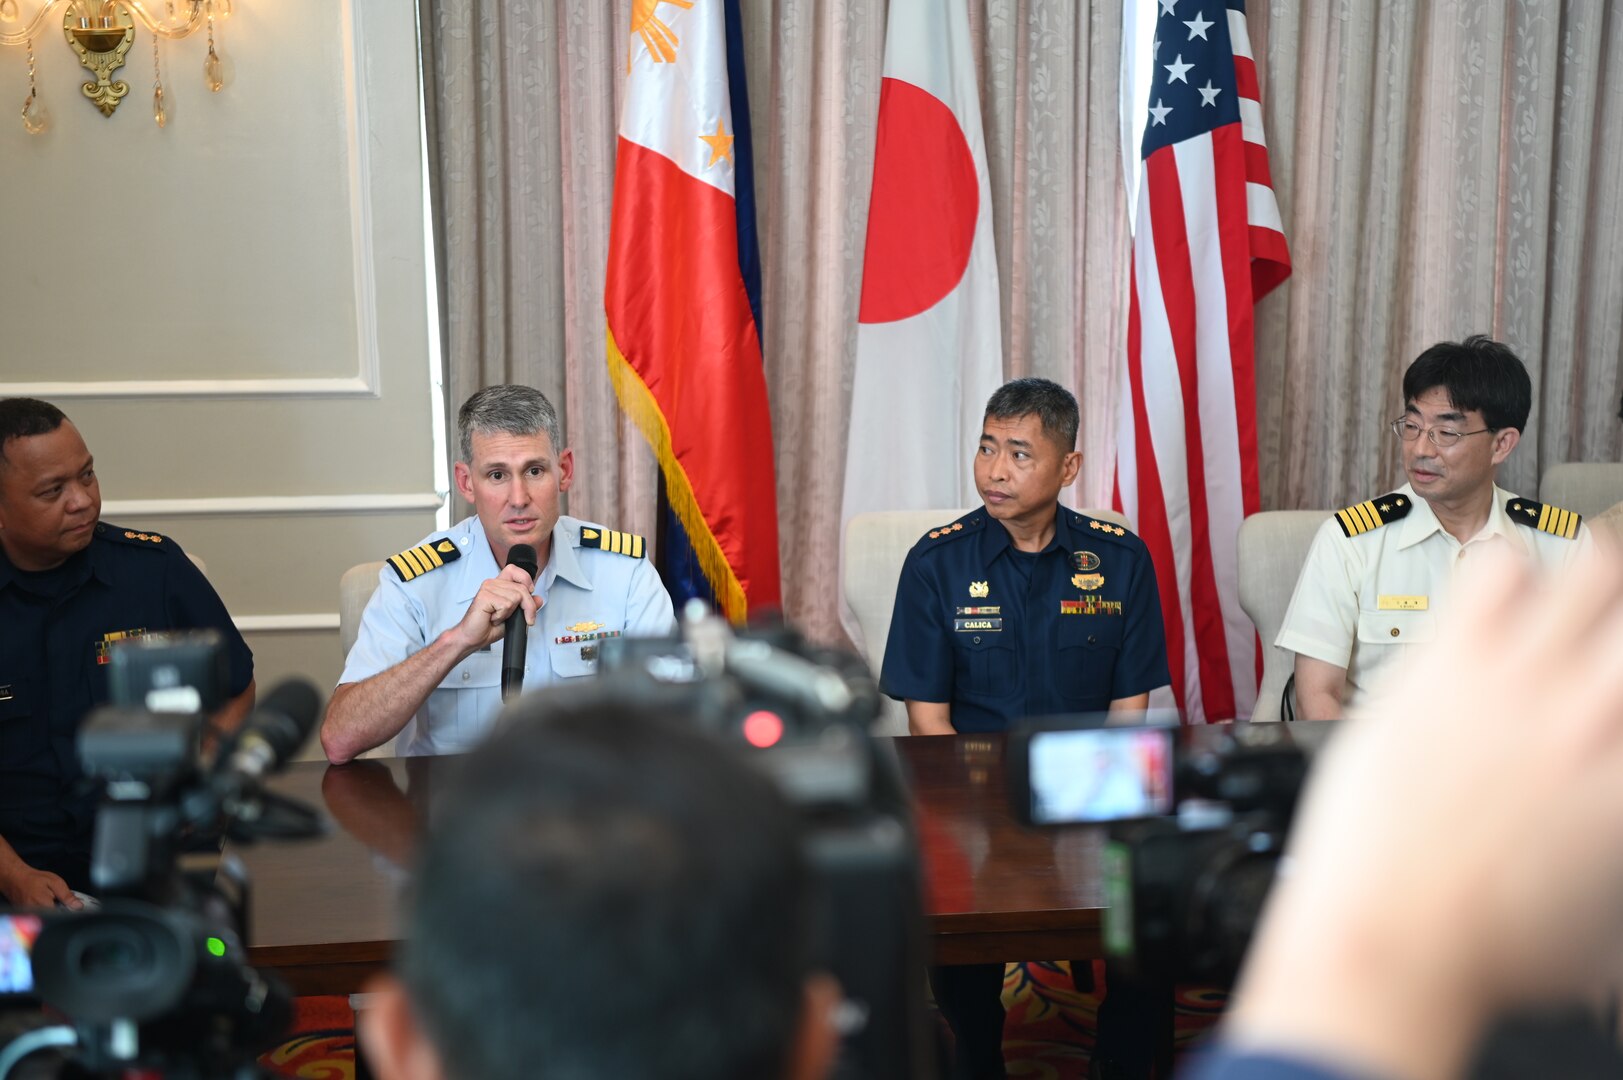 Capt. Brian Krautler, U.S. Coast Guard Cutter Stratton’s (WMSL 752) commanding officer, speaks to media during a press briefing about the scheduled at-sea joint operations planned for Stratton, the Japan Coast Guard Vessel Akitsushima (PLH 32), and the Philippine Coast Guard after departing Manila, Philippines, June 3, 2023. Stratton deployed to the Western Pacific to conduct engagements with regional allies and partner nations, reinforcing a rules-based order in the maritime domain.  (U.S. Coast Guard photo by Chief Petty Officer Matt Masaschi)